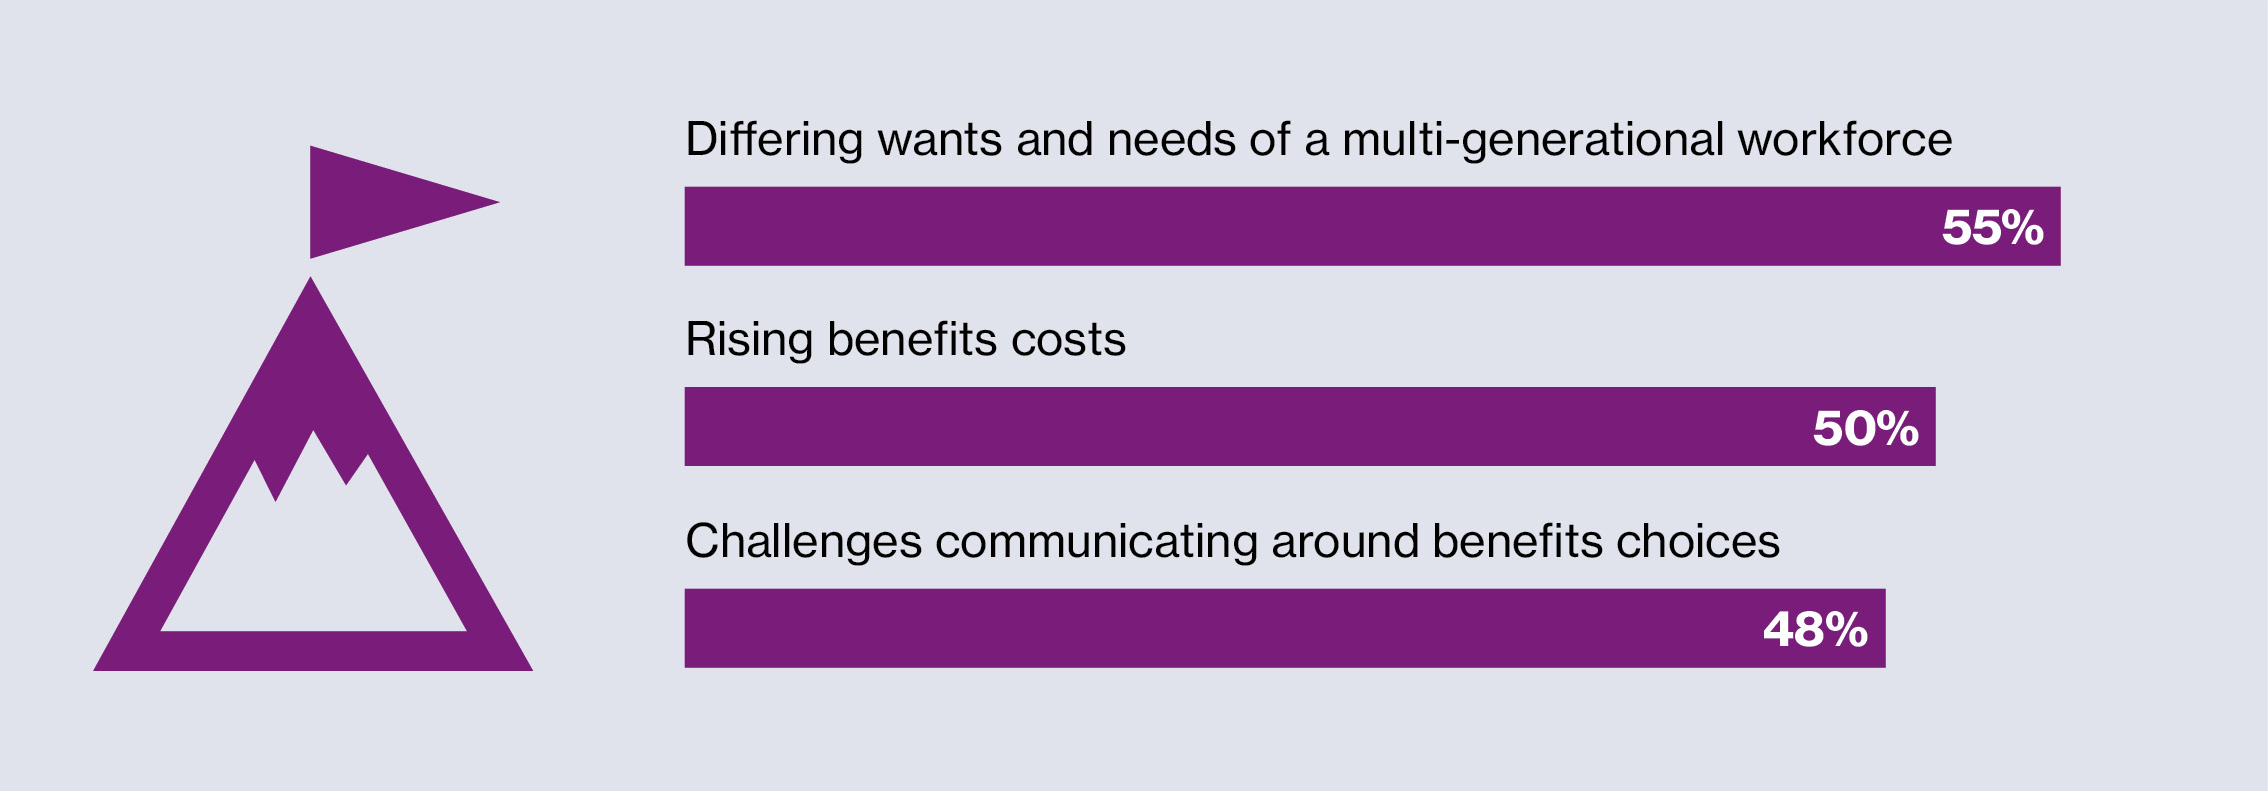 Infographic about benefits strategy challenges over the next three years